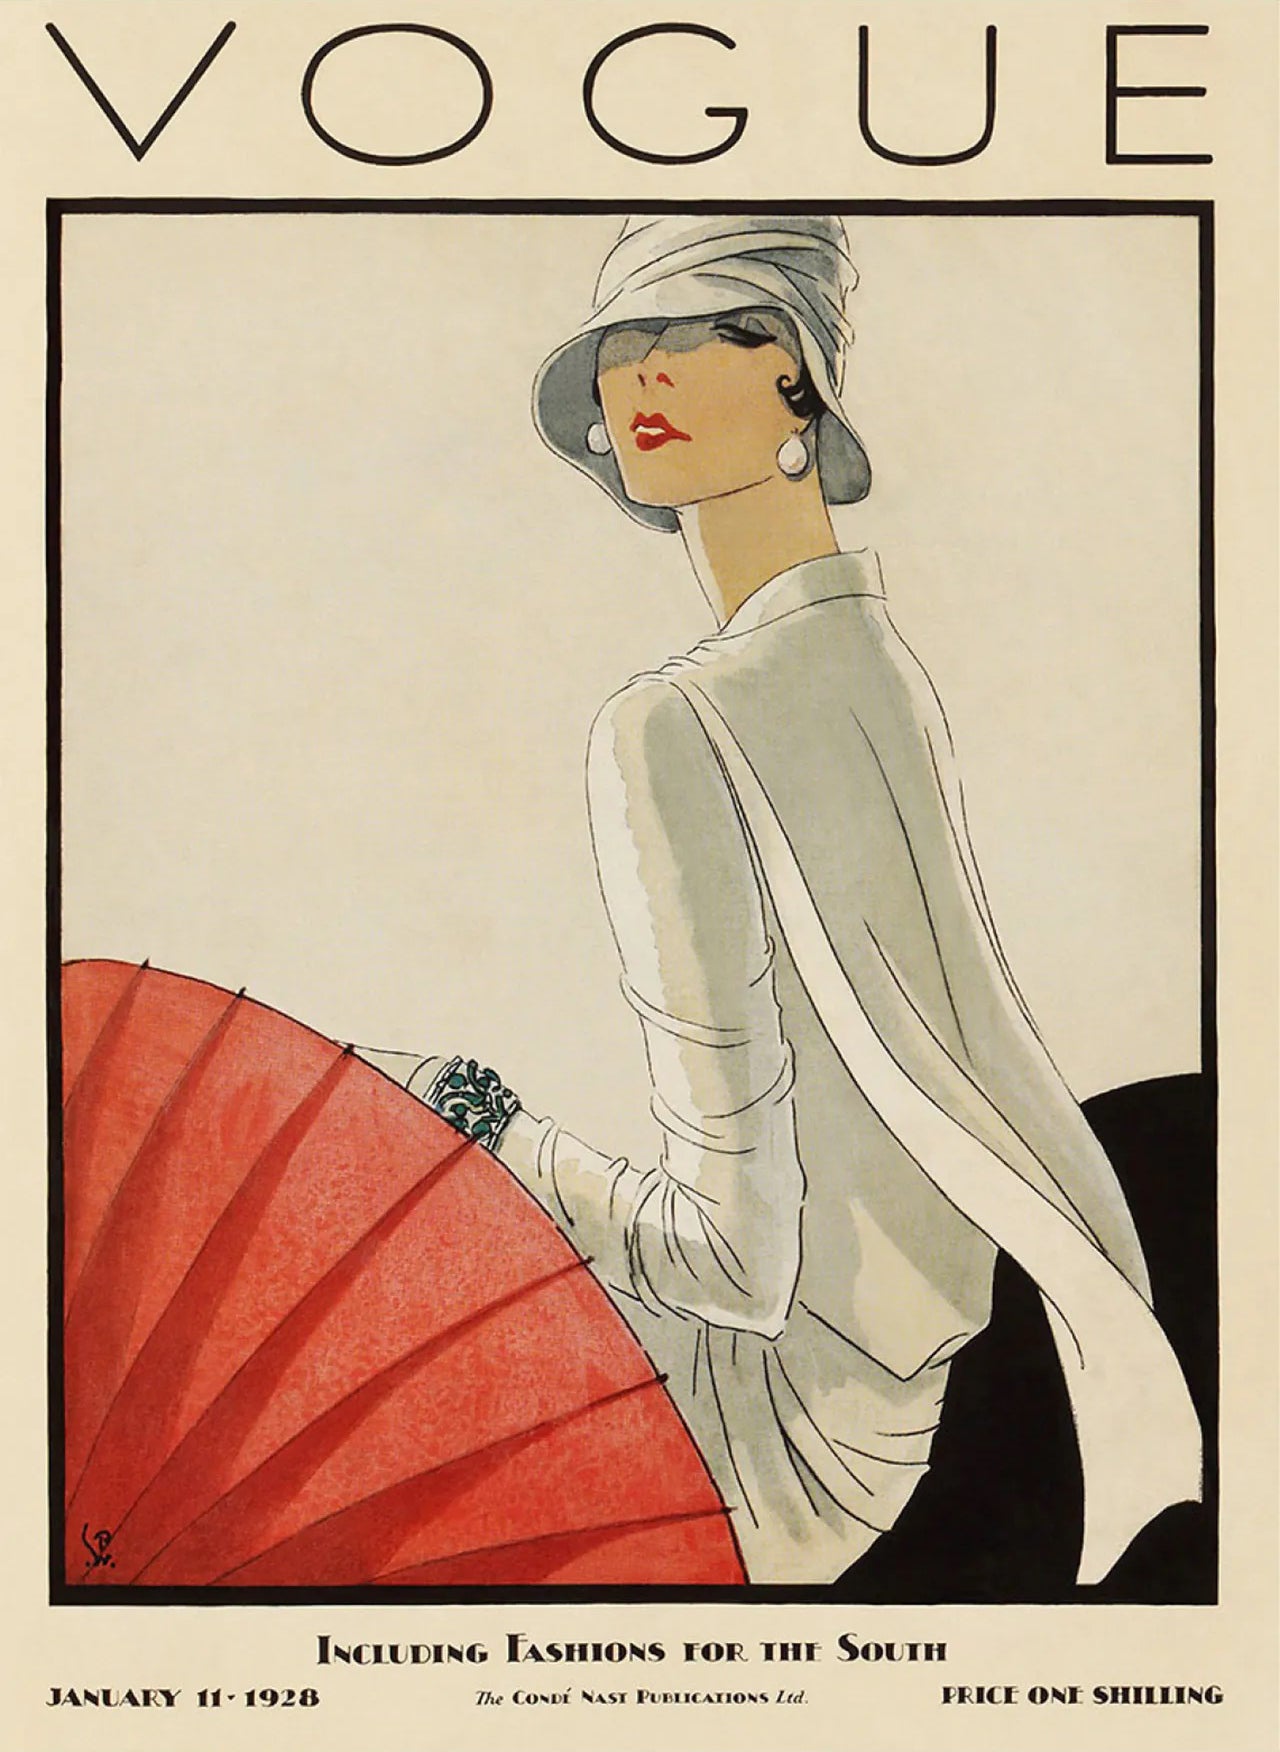 Vintage Vogue Fashion For the South Cover (1928) - 17" x 22" Fine Art Print